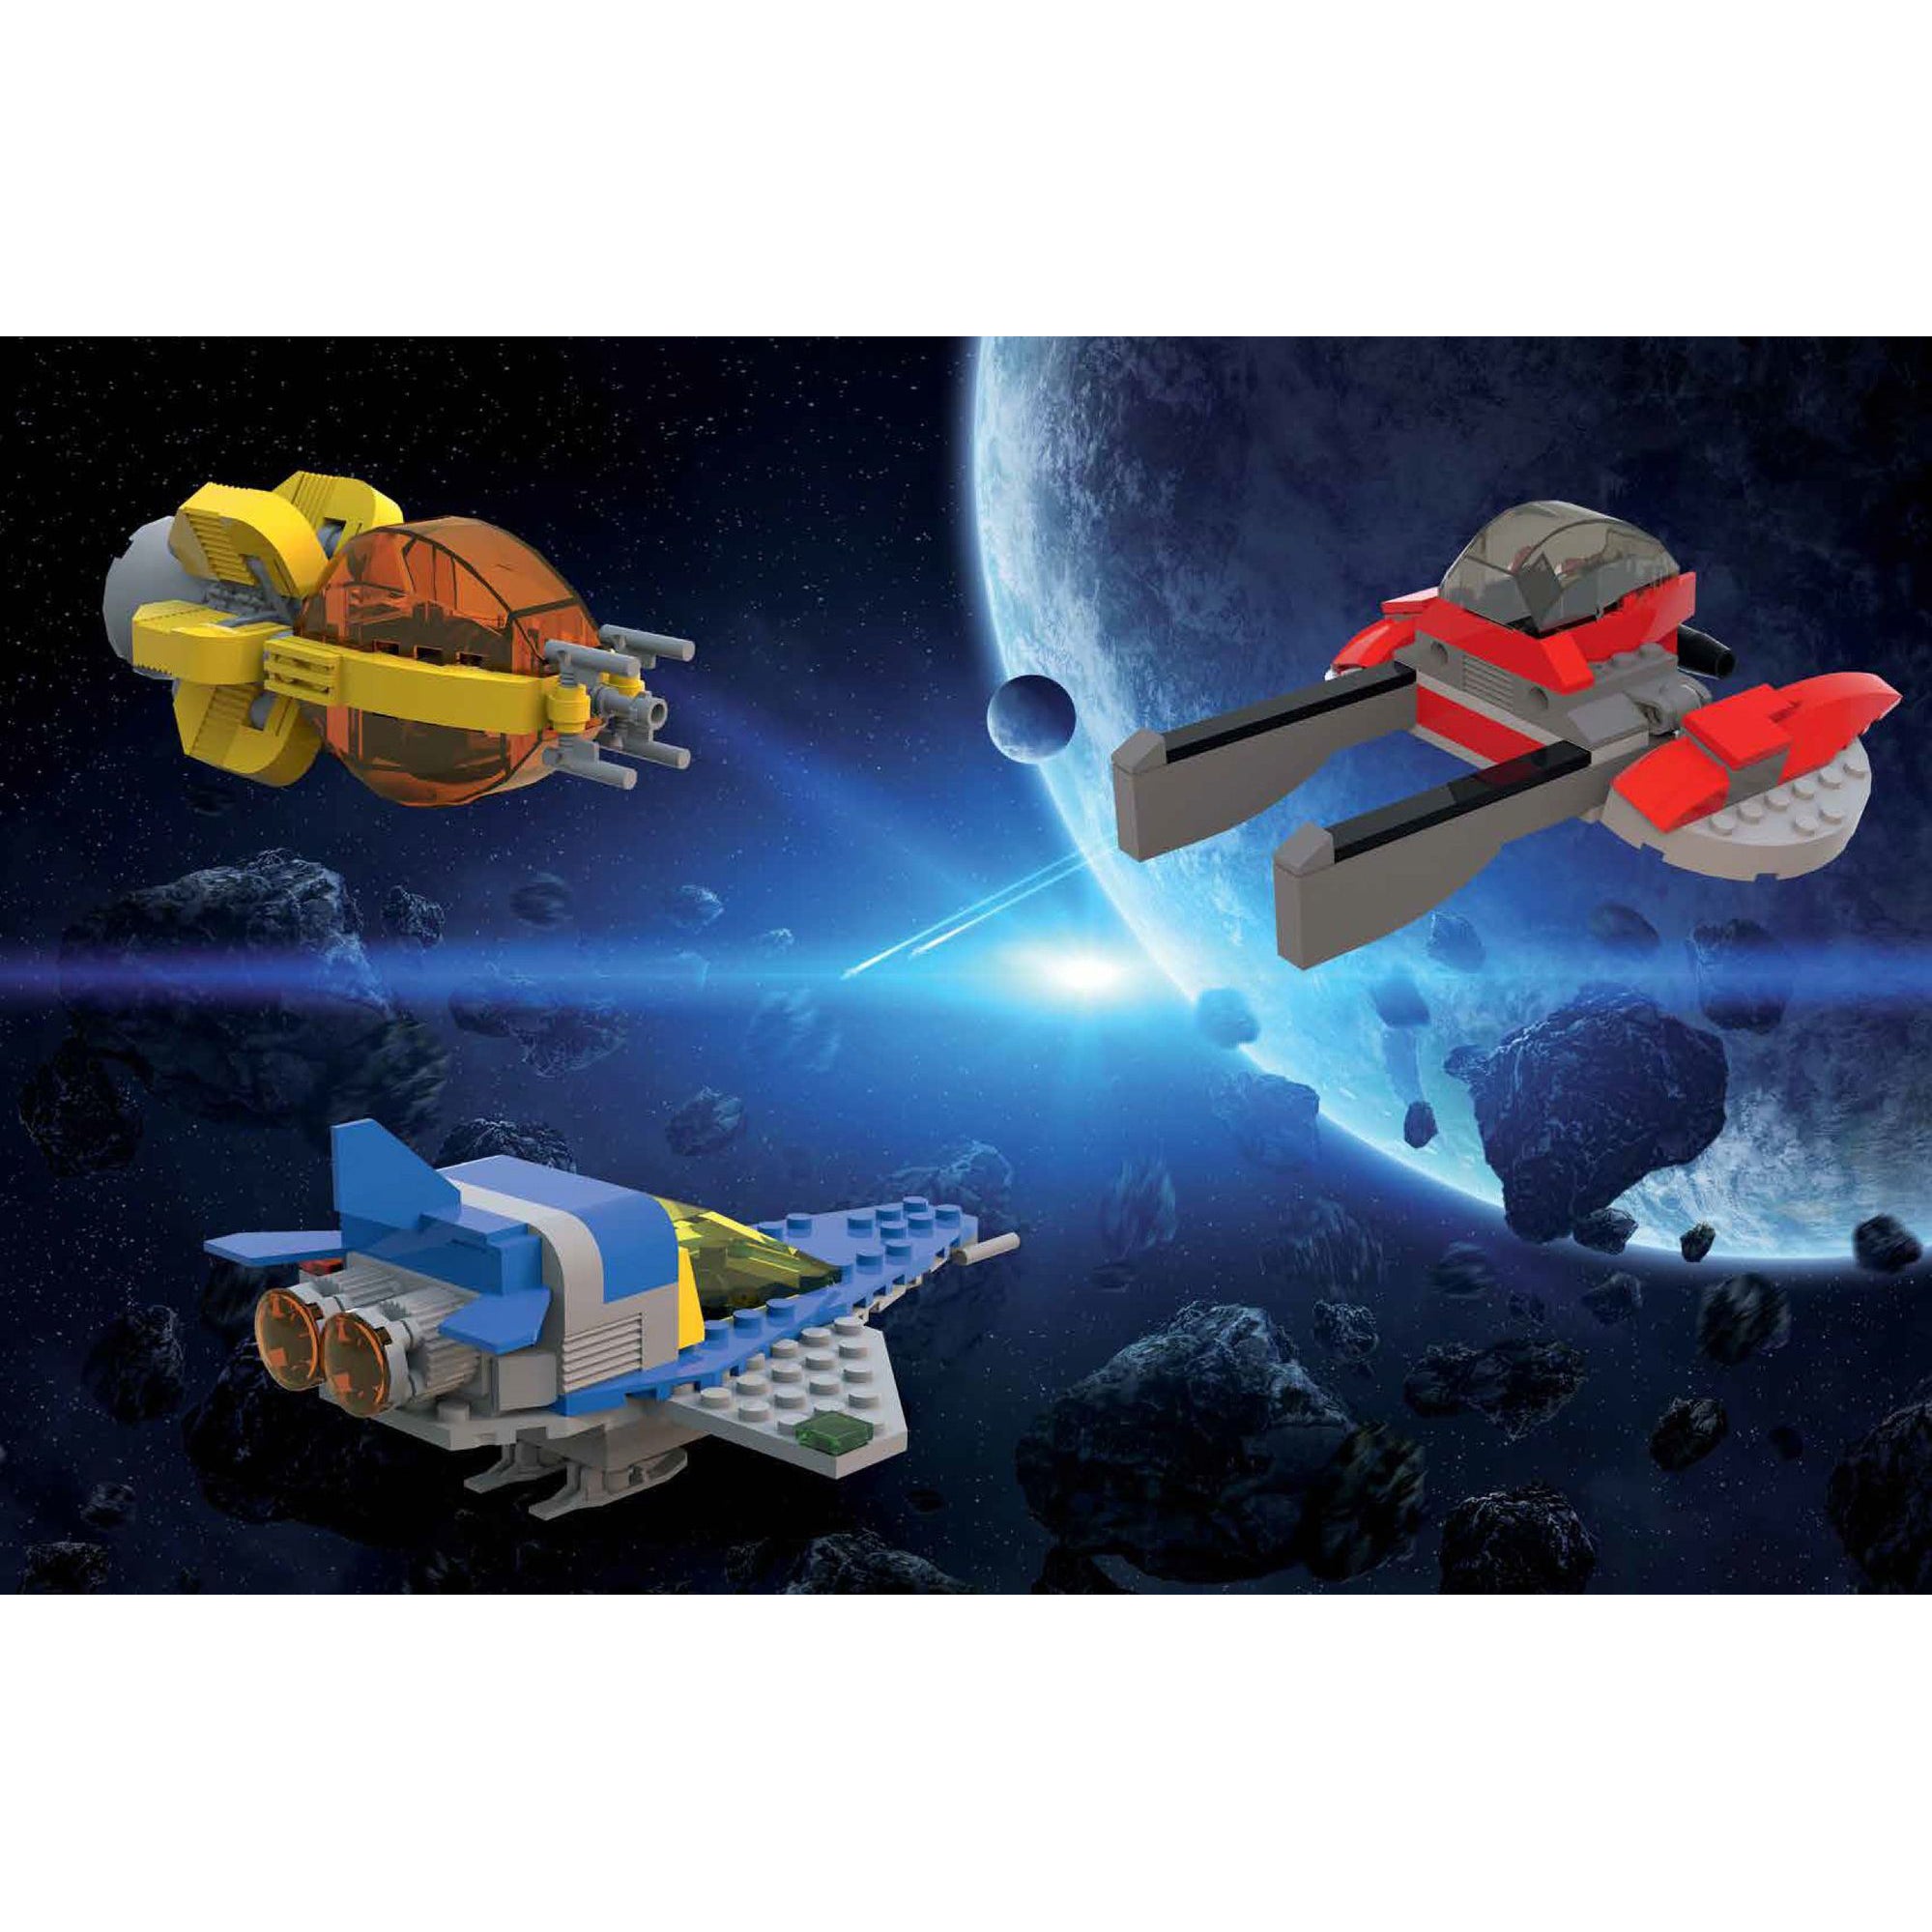 Space adventures - build amazing robots and spaceships with LEGO® bricks